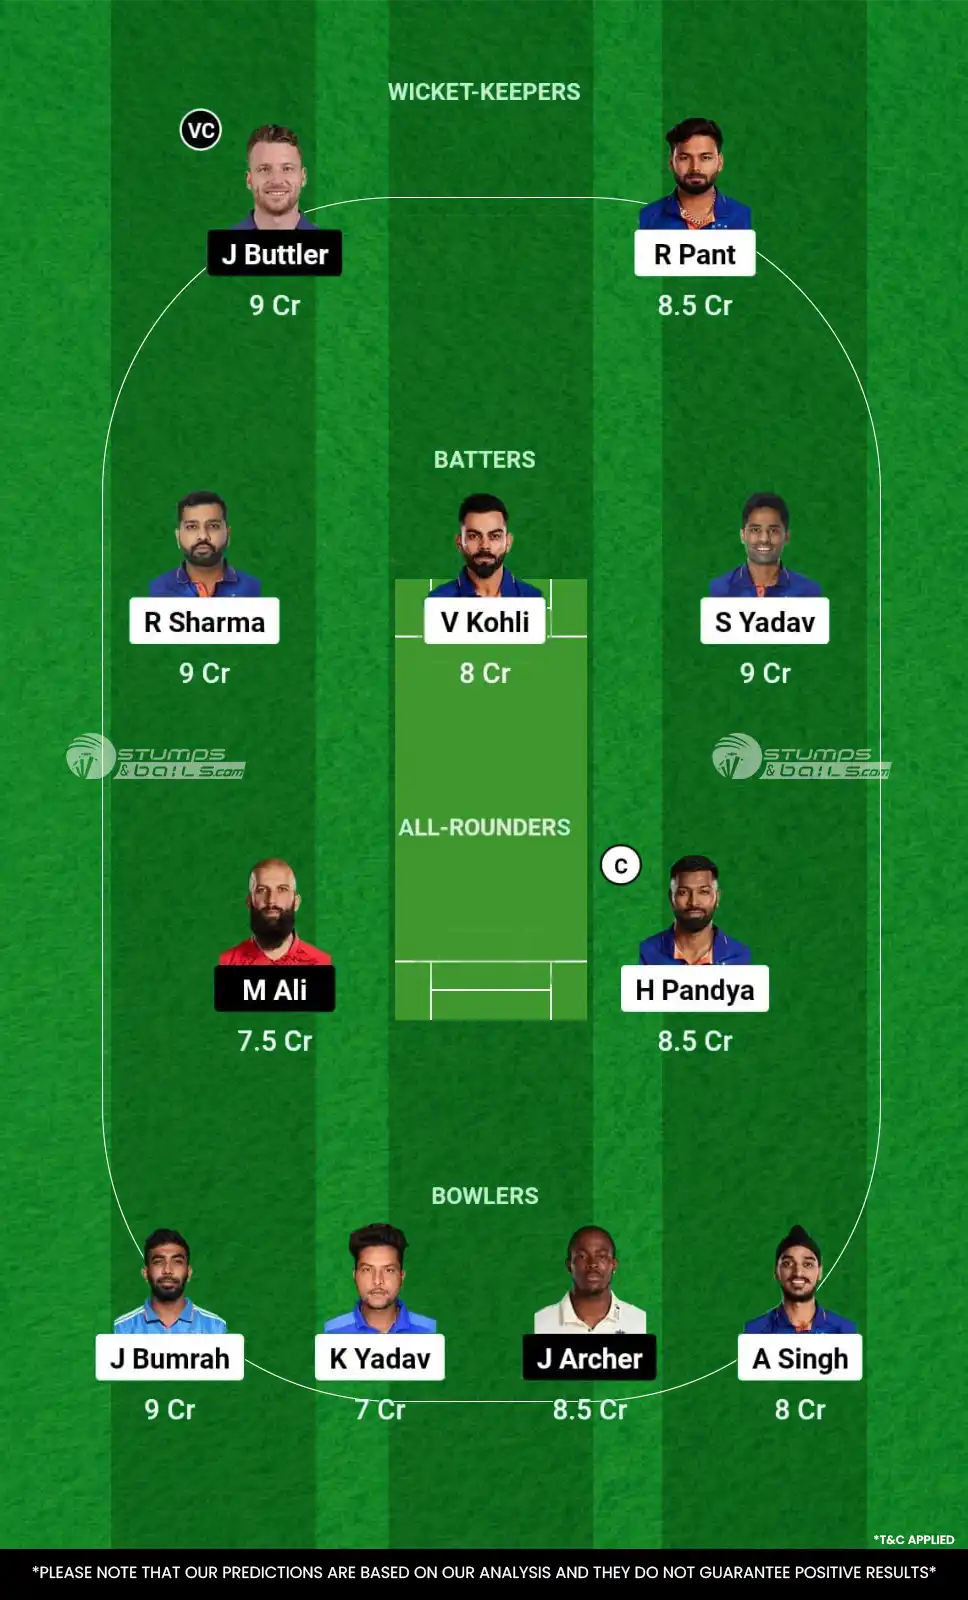 IND vs ENG Dream11 Prediction Today